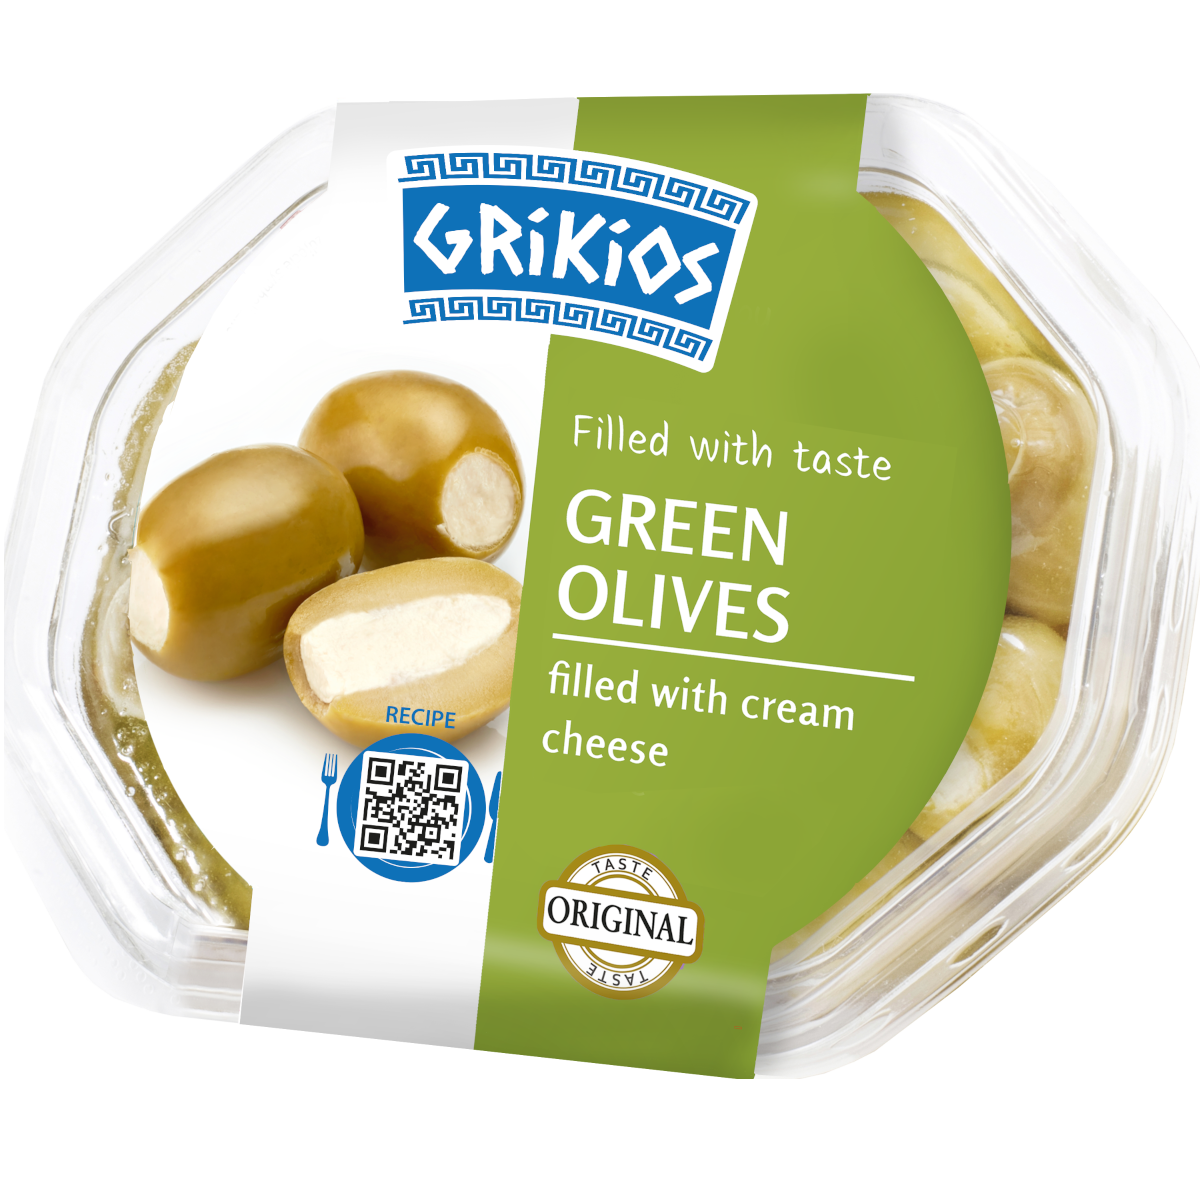 Grikios green olives filled with fresh cheese